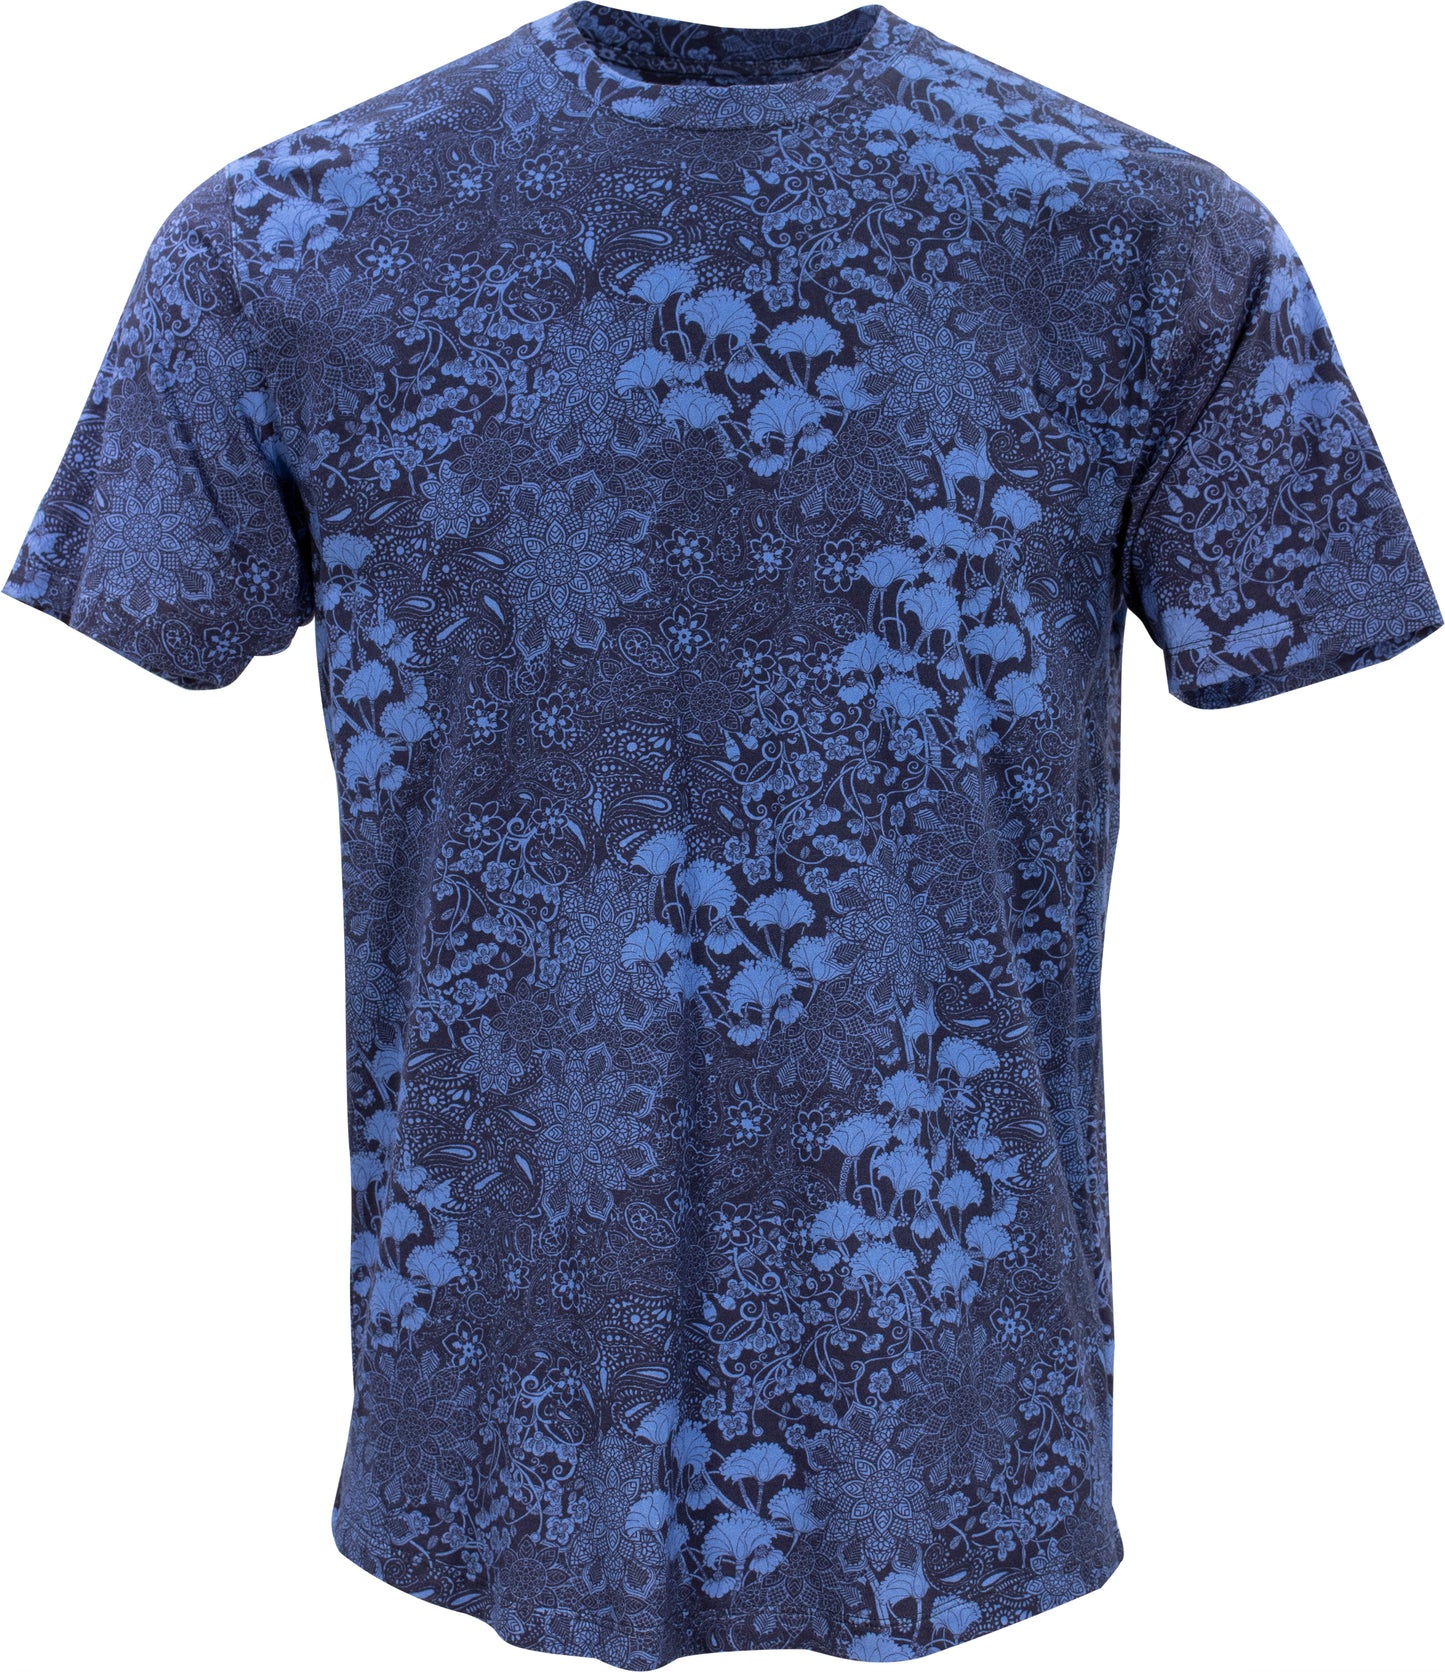 Taylor Paisley Floral Navy Crew Neck Tee